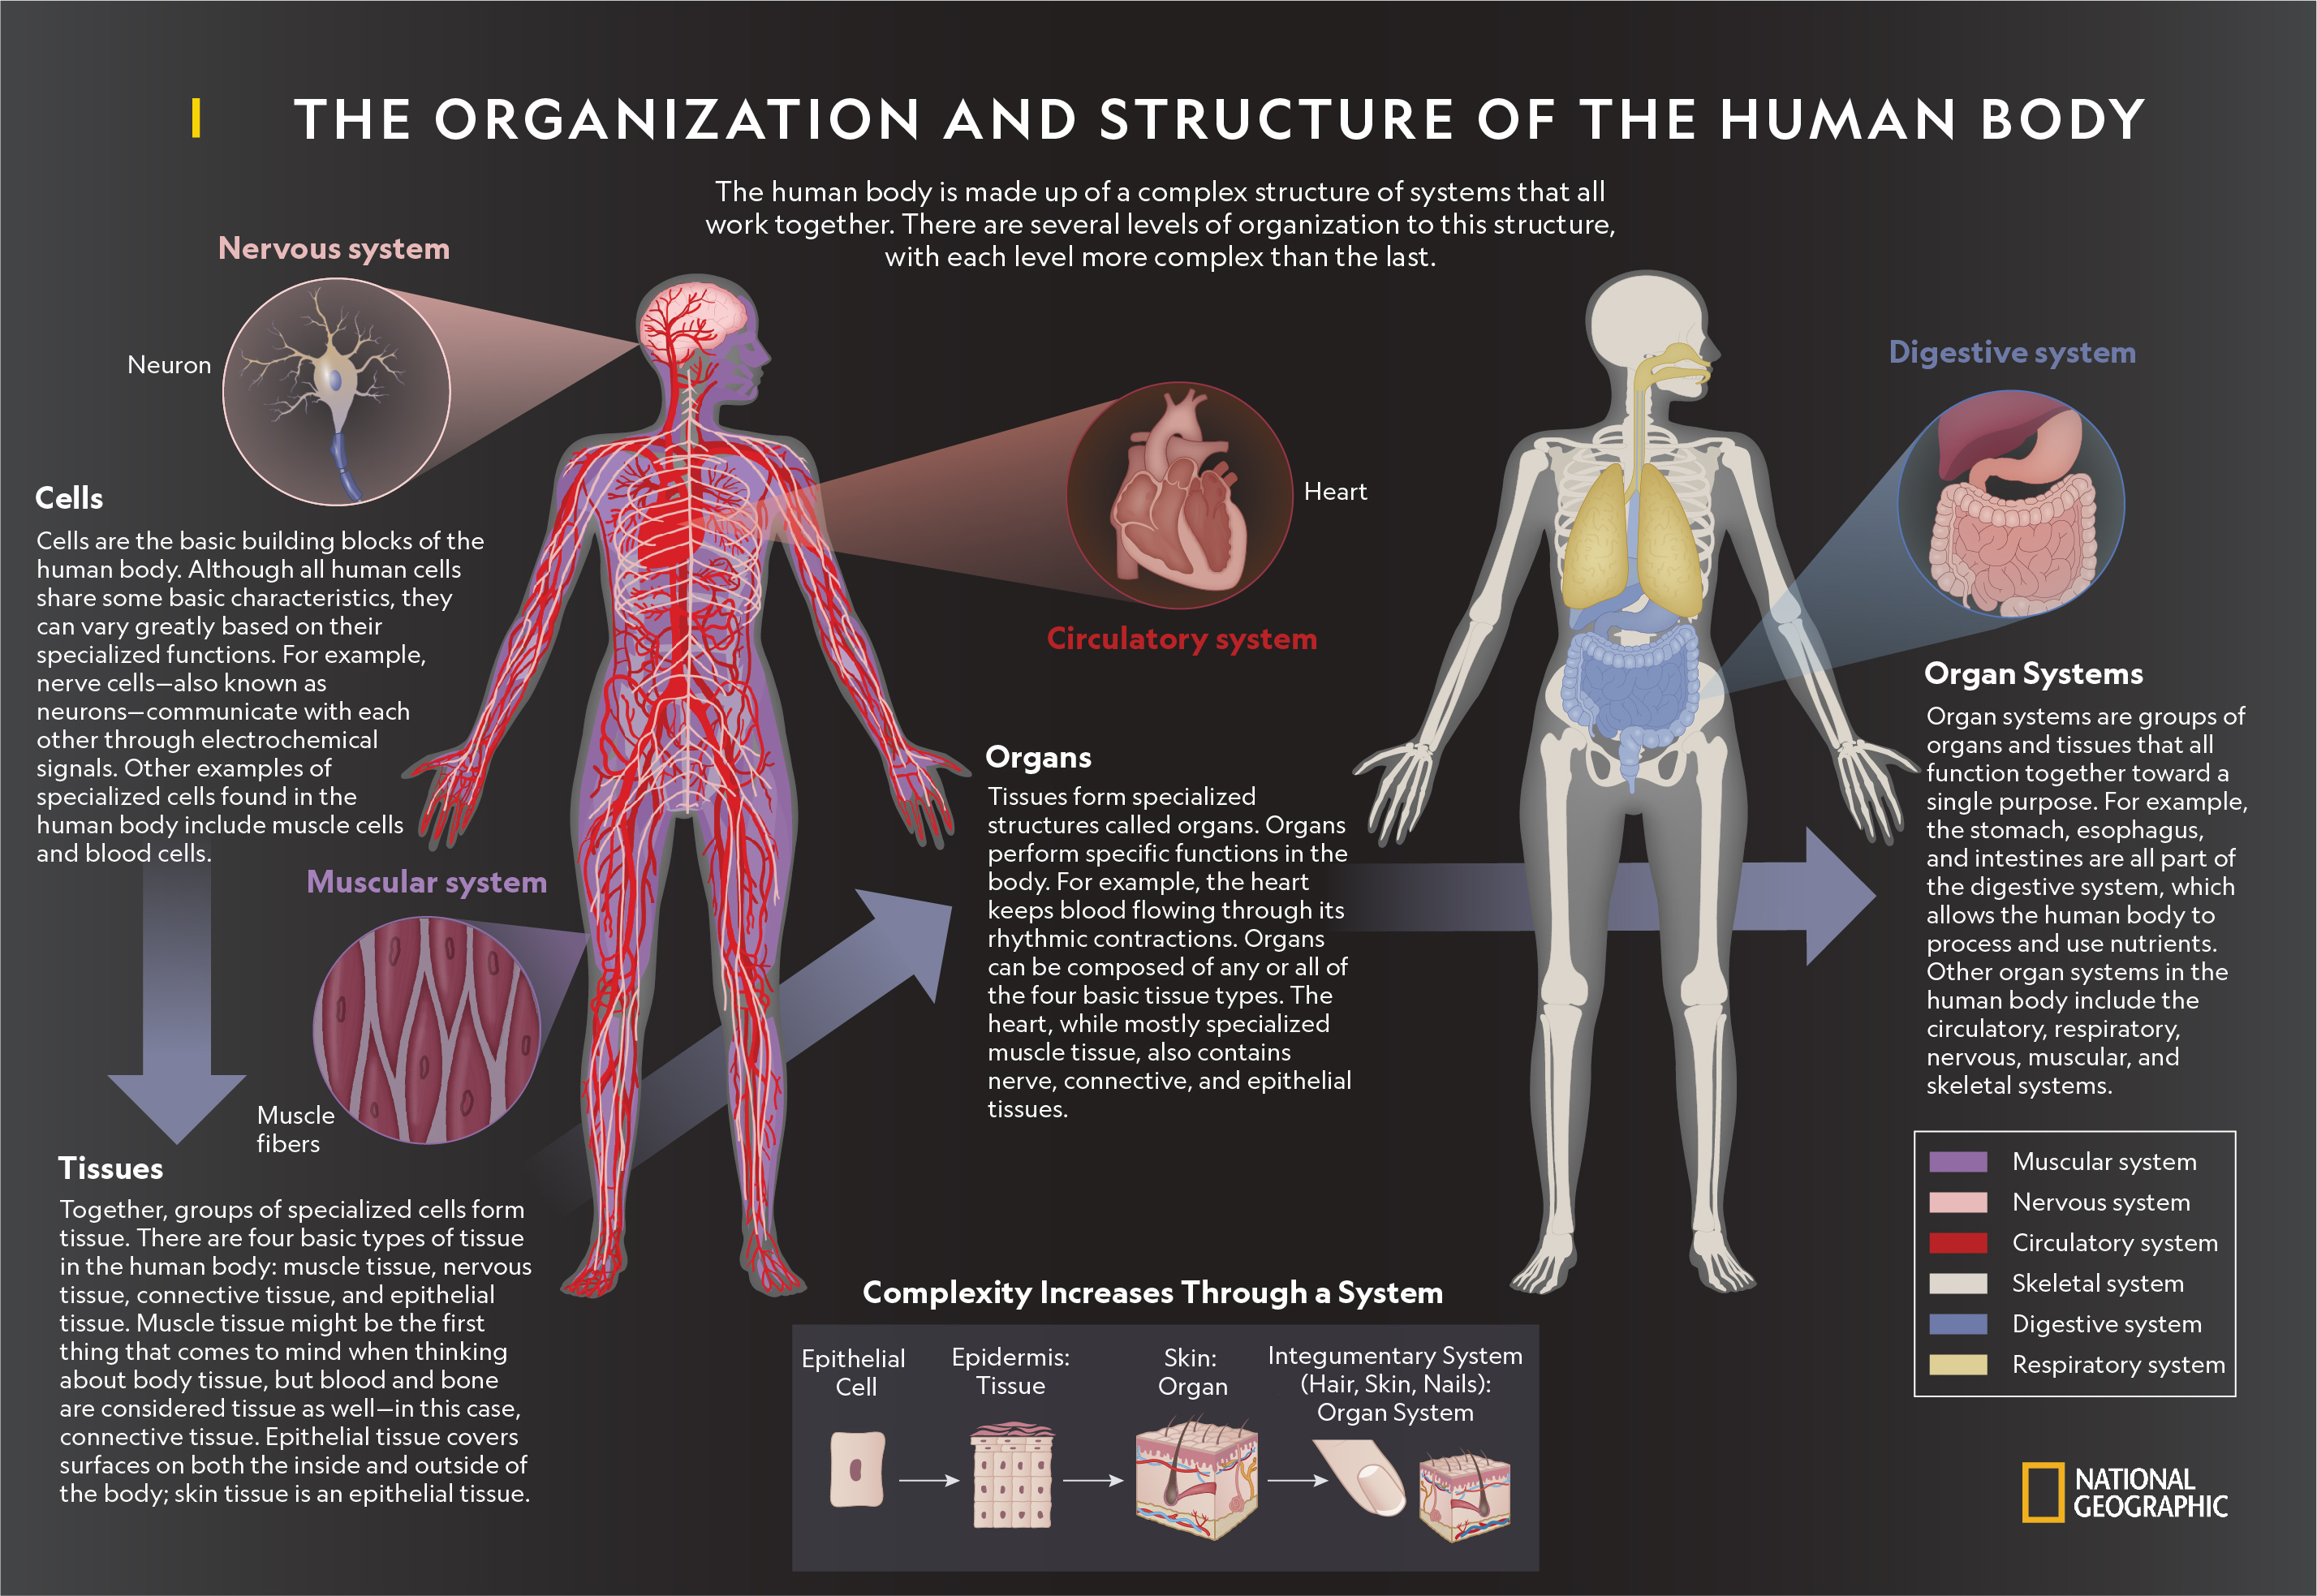 organ systems and their functions